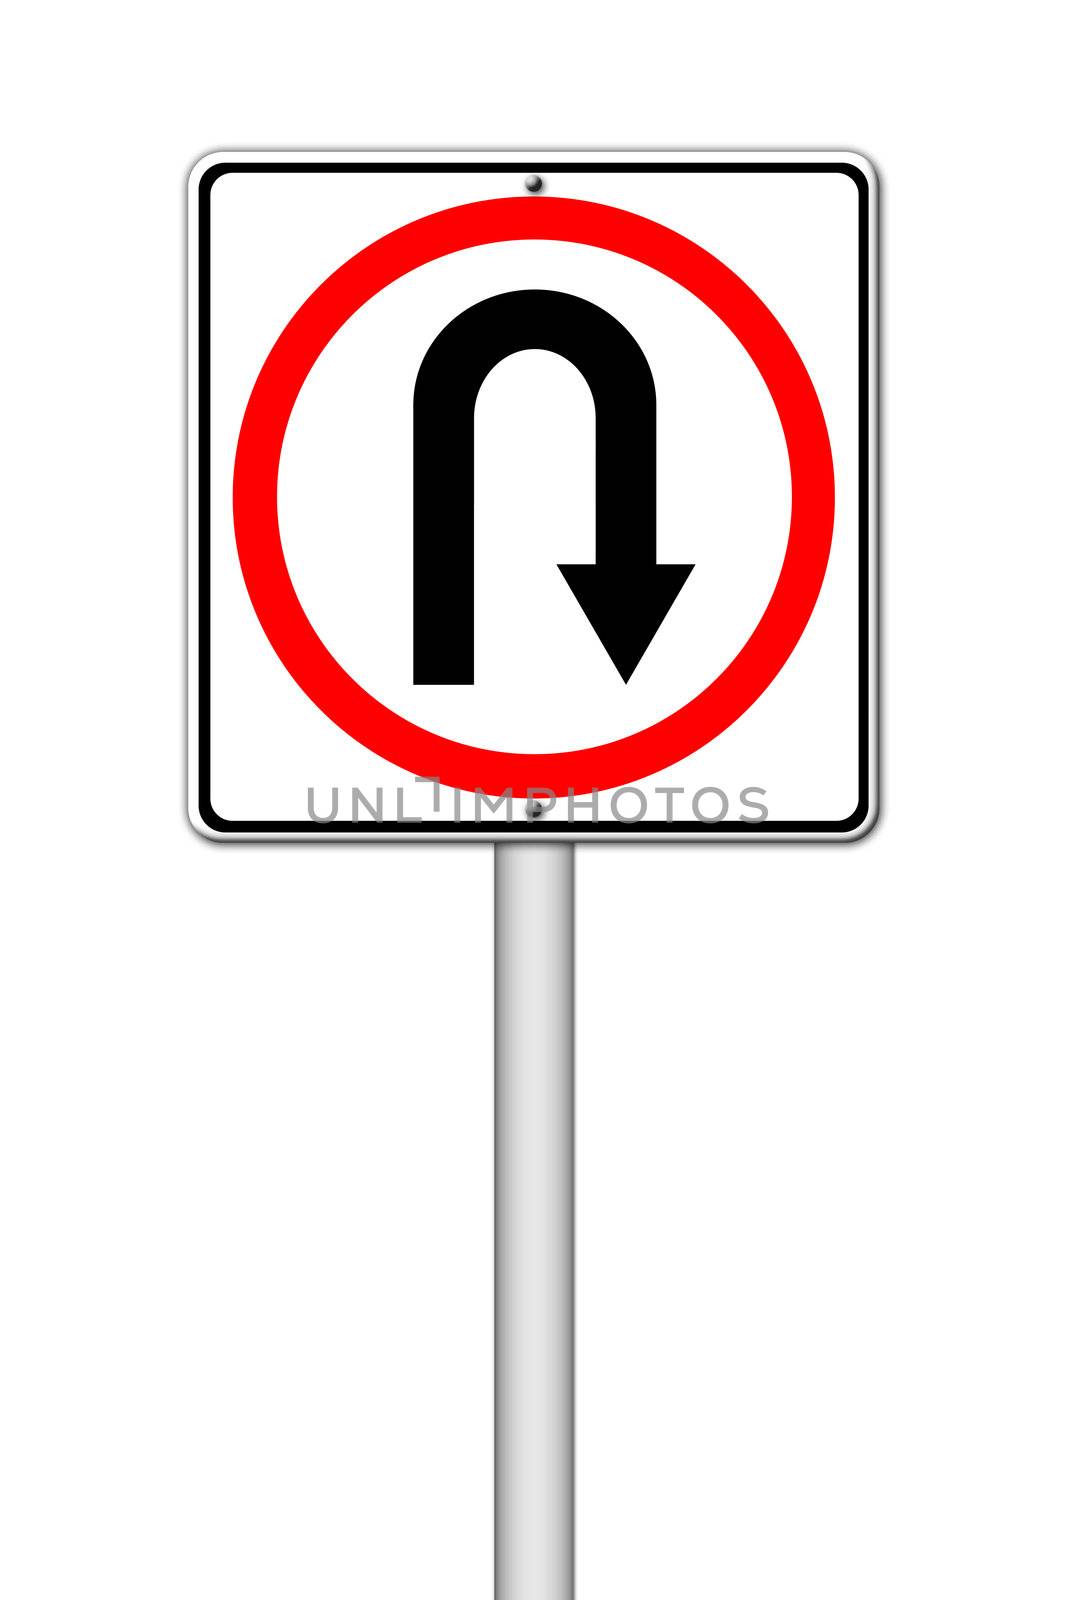 Turn back road sign by geargodz